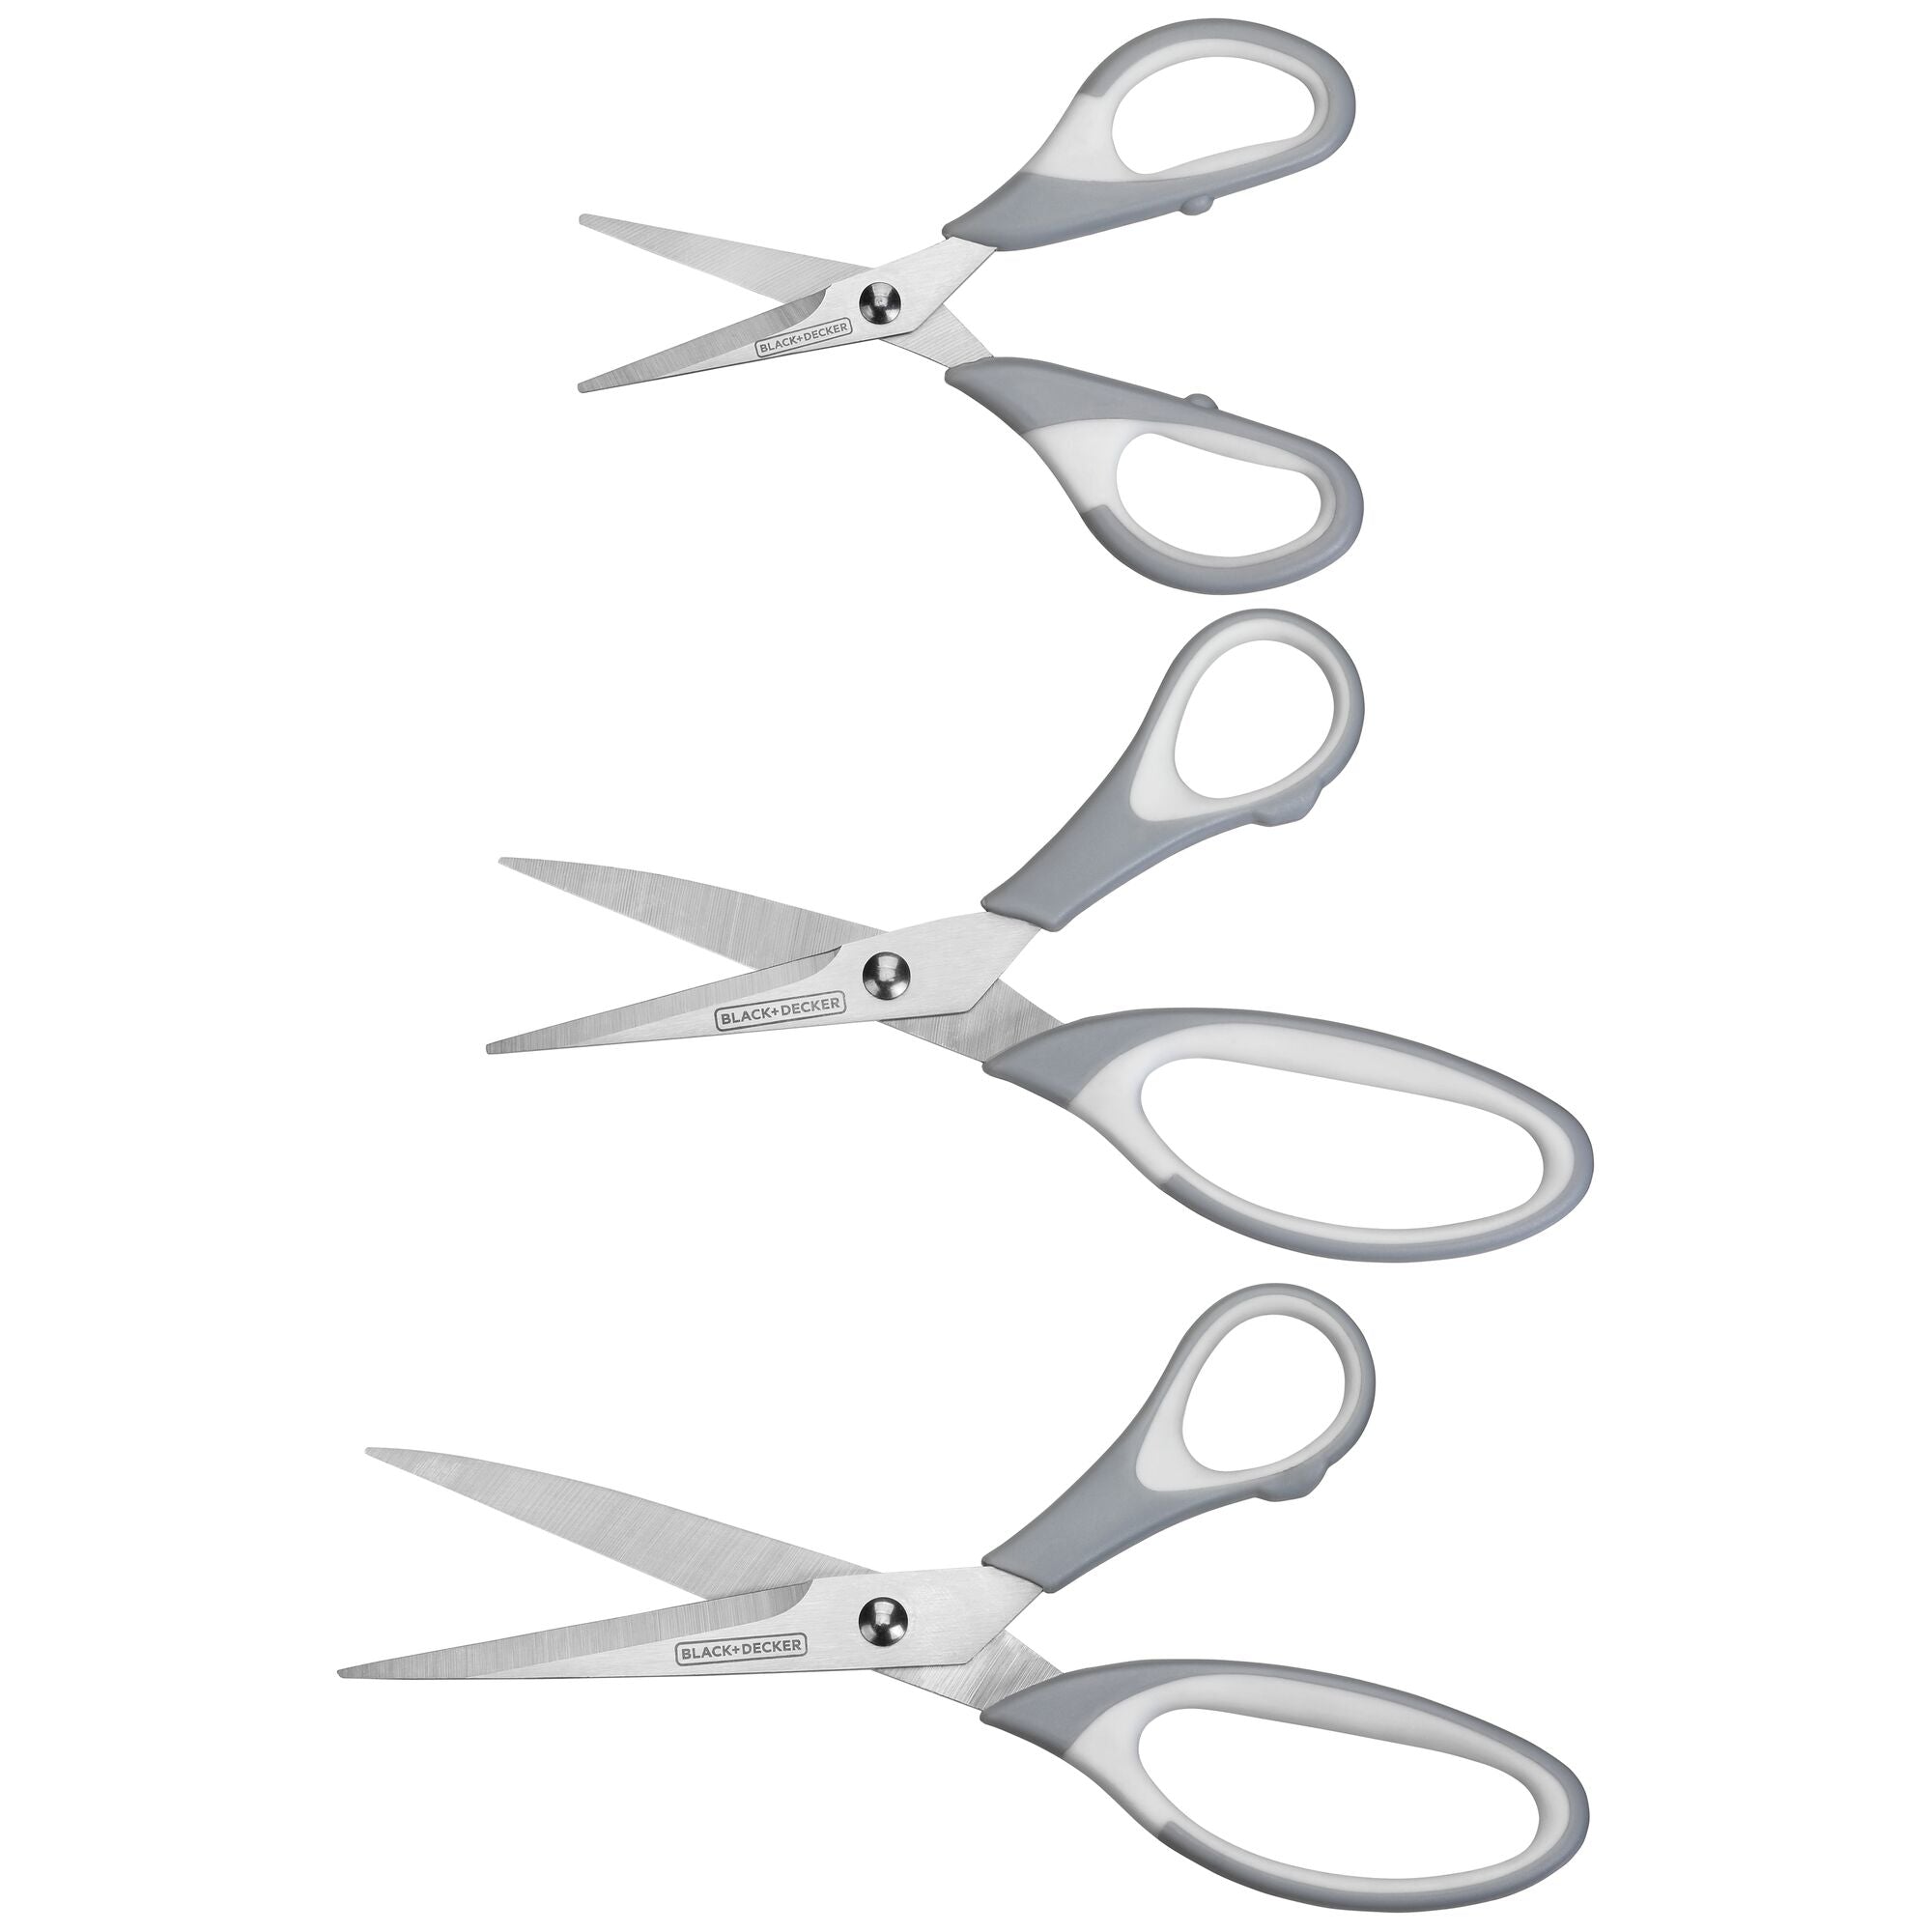 Scissors Multi-Pack With 5.5 In., 6.5 In., And 8.5 In